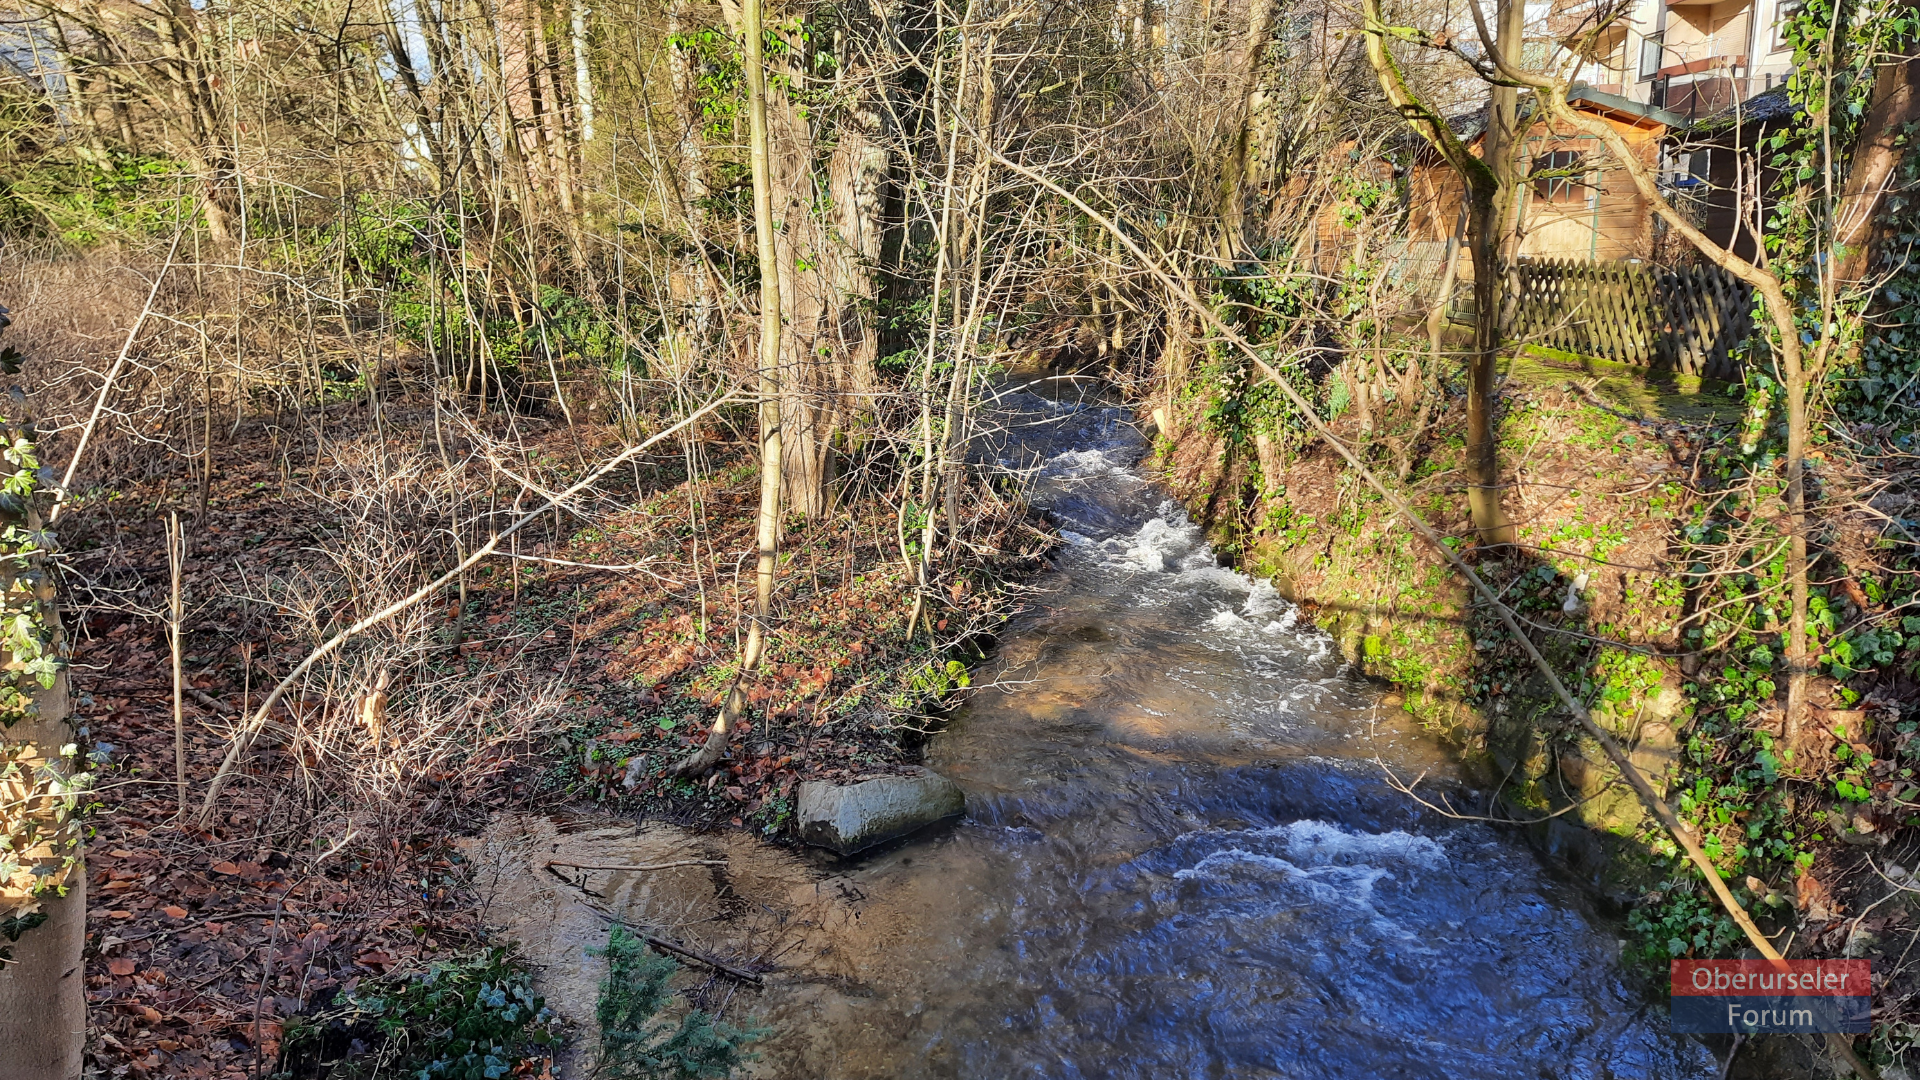 The Urselbach in the morning sunshine, just before it flows under the Kupferhammerweg.  Top left is the stream where the water from the Werksgraben flows into it.